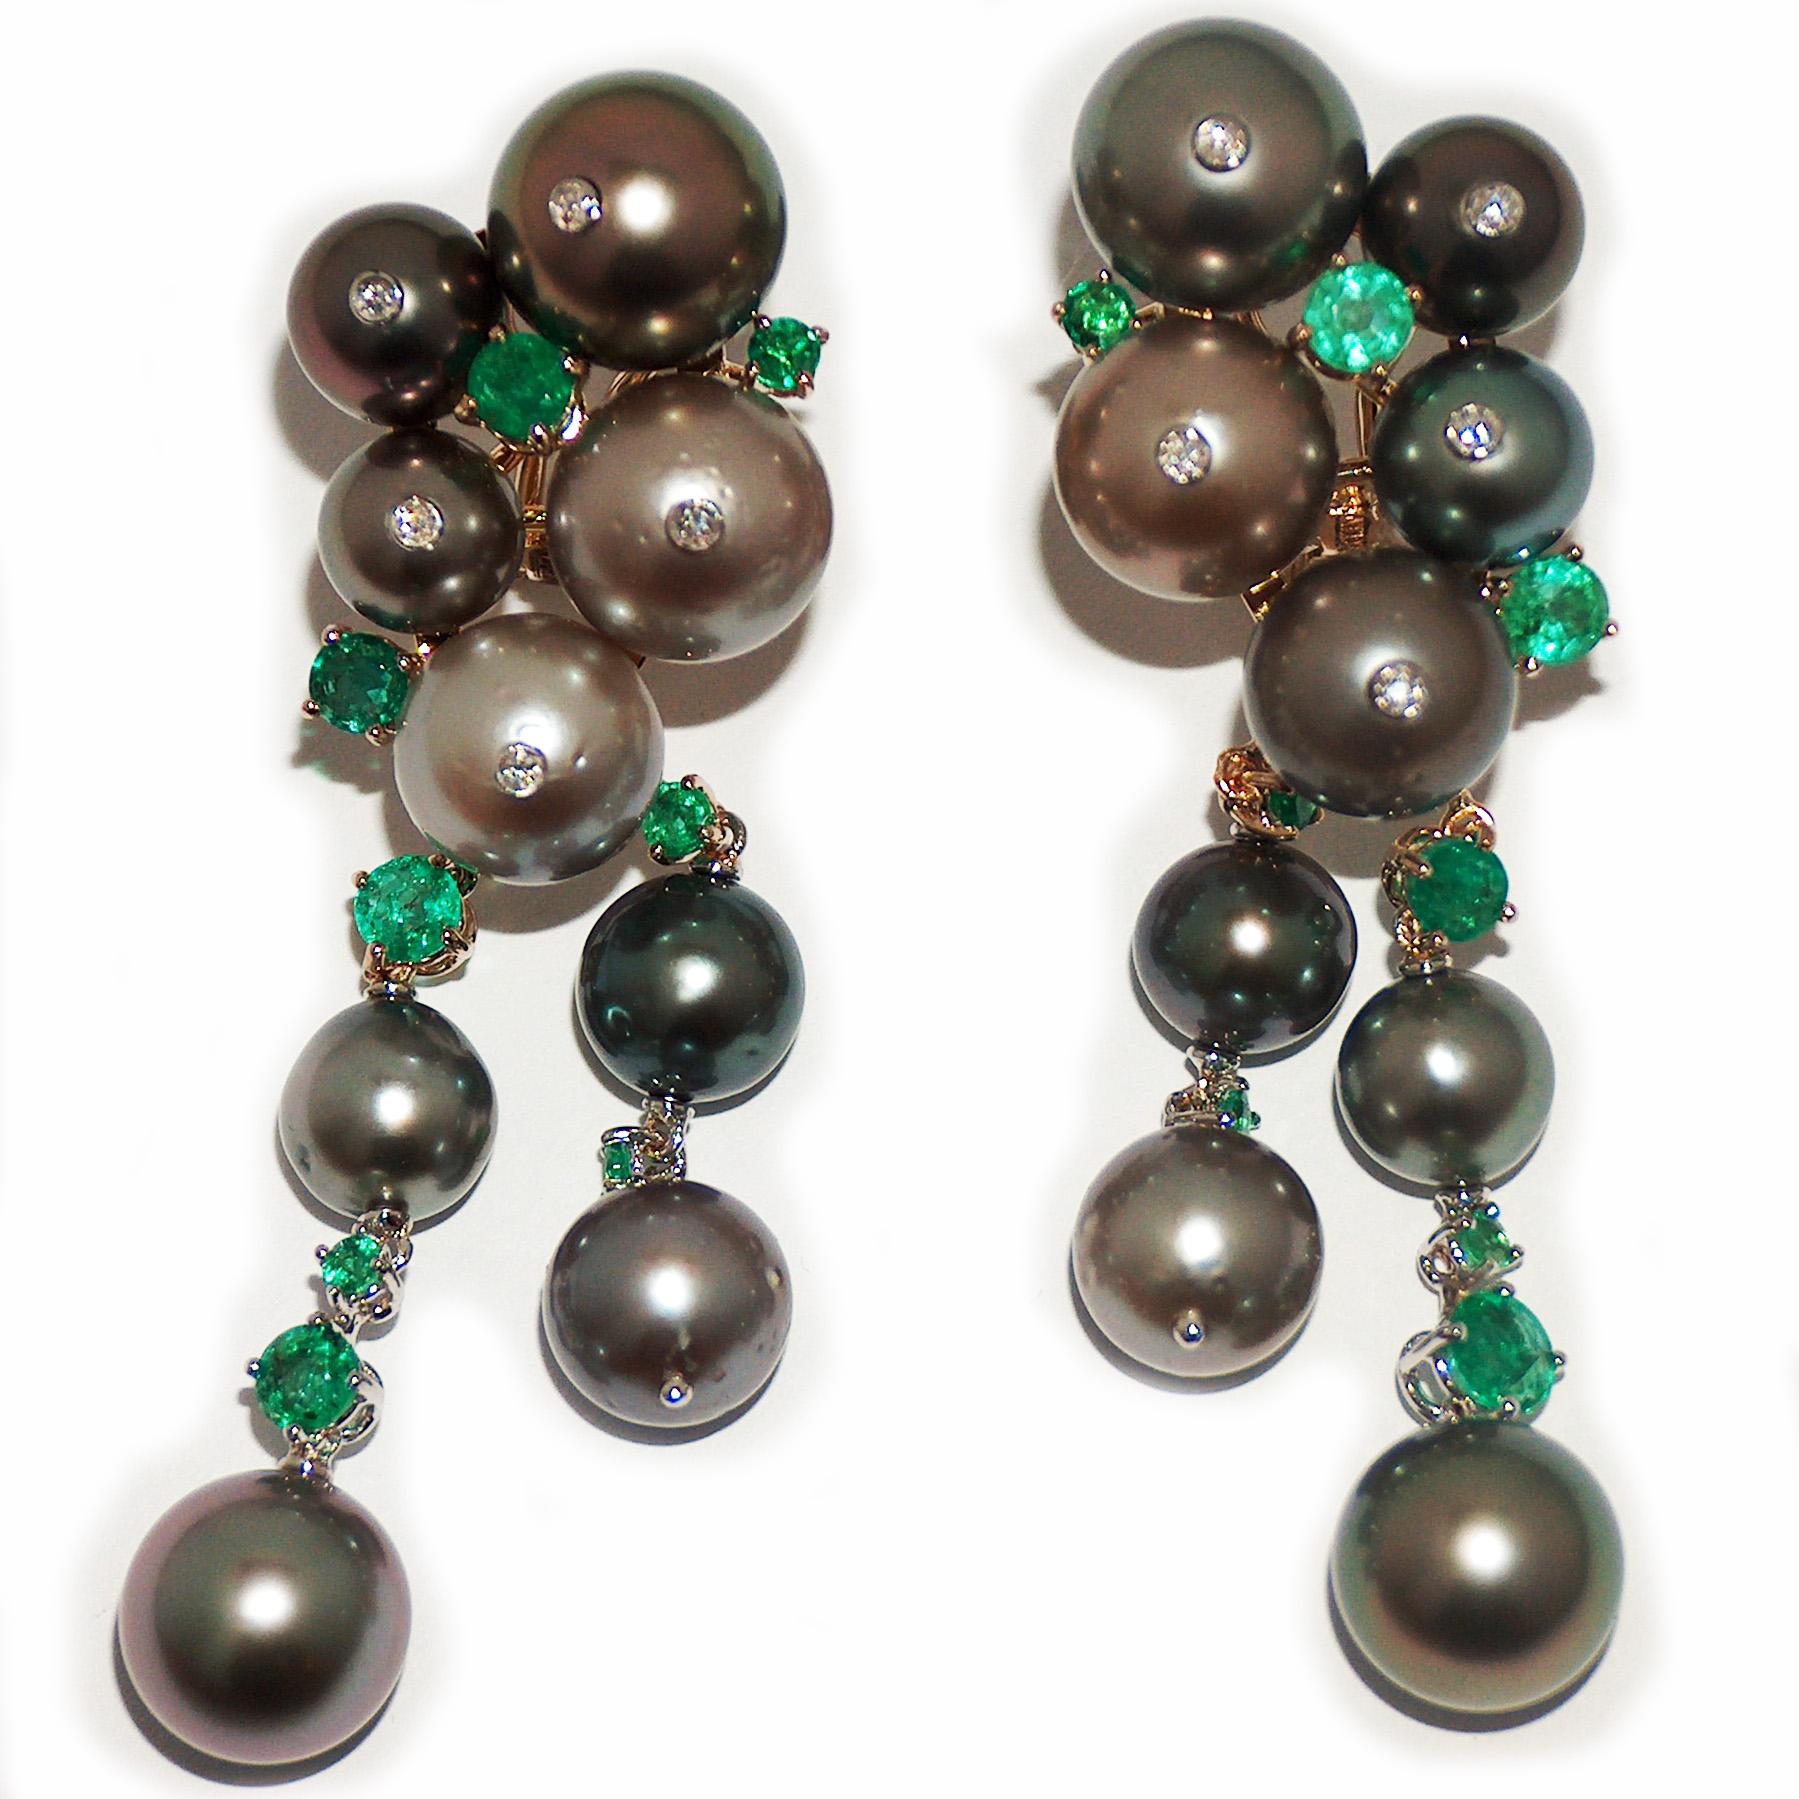 Paolo Piovan Tahitian Pearls, Emeralds and Diamonds Earrings in yellow gold In New Condition For Sale In Padova, Padova